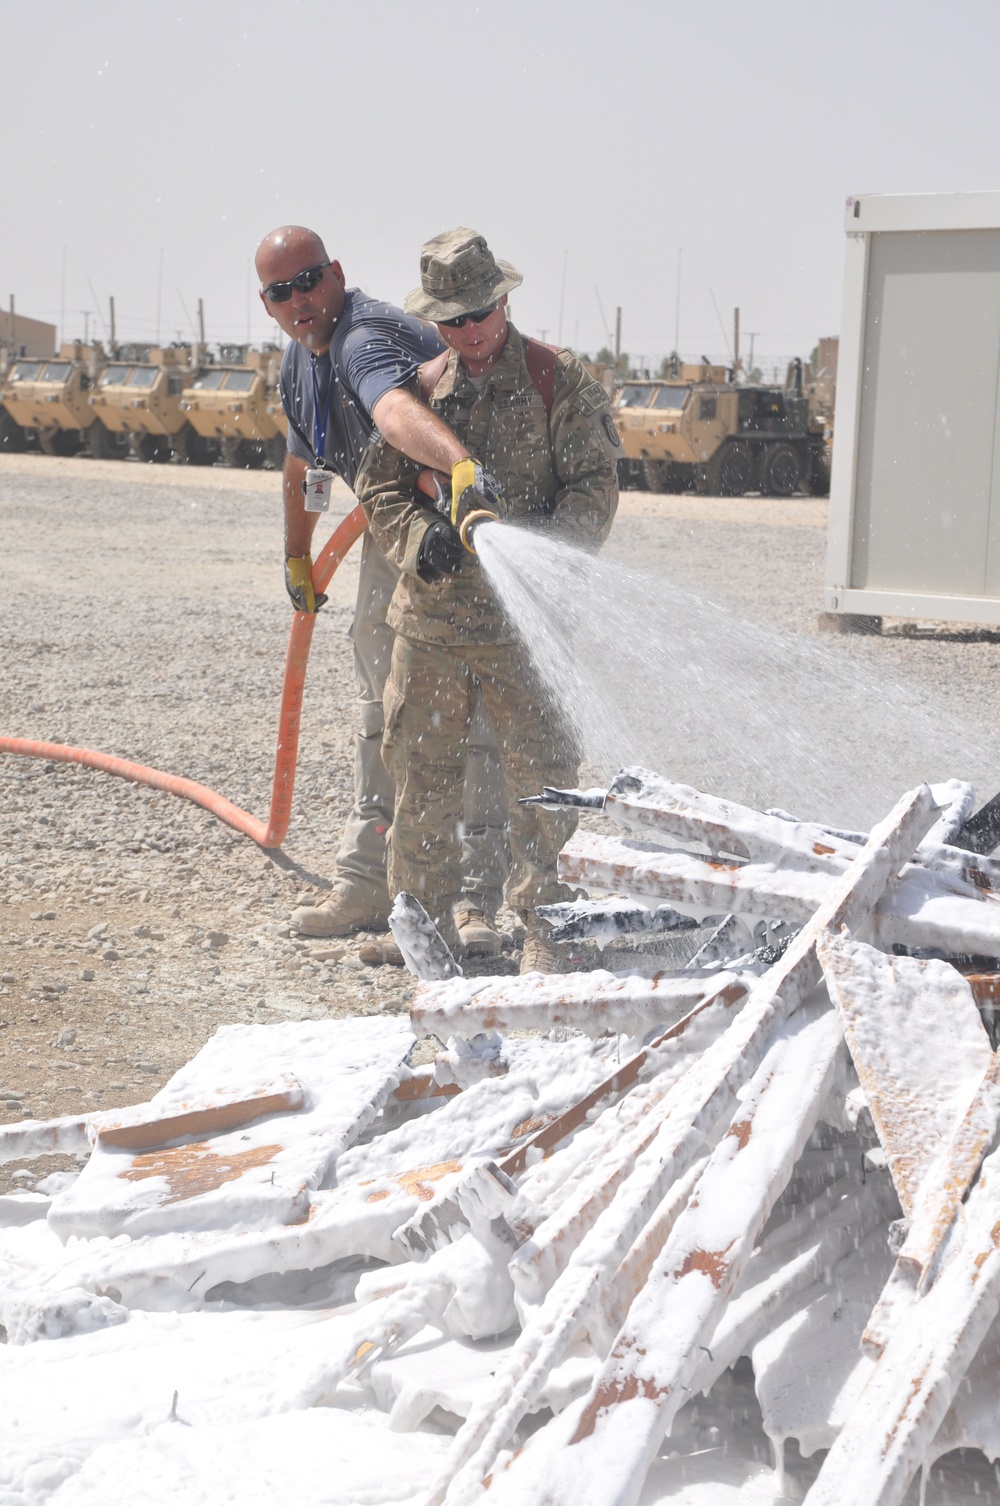 Fire safety training keeps deployed troops prepared